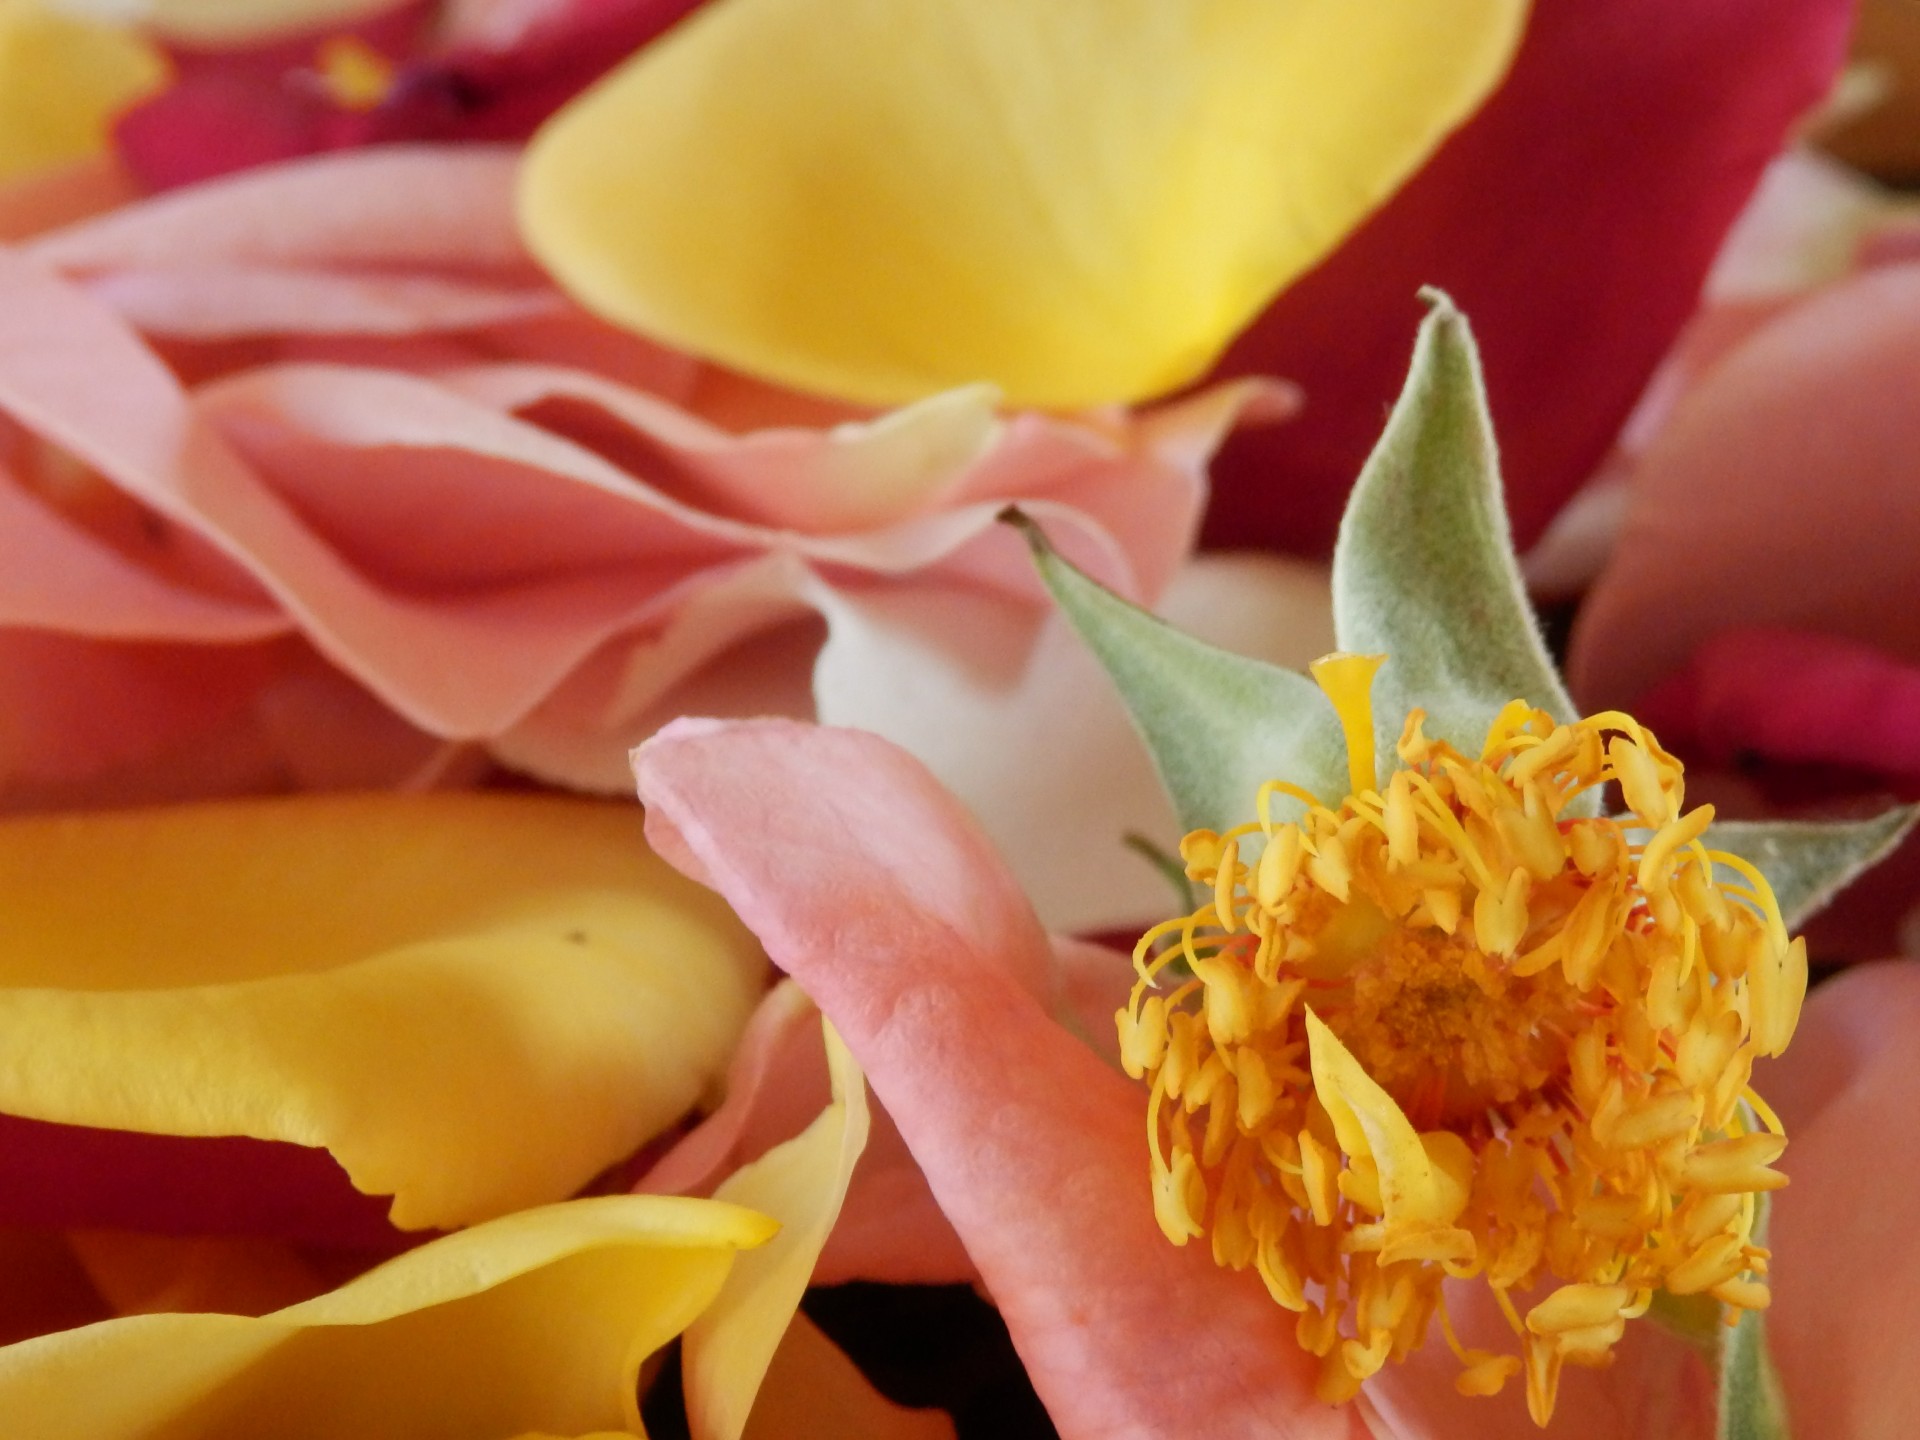 pink, yellow, red and white rose petals with flower stamen